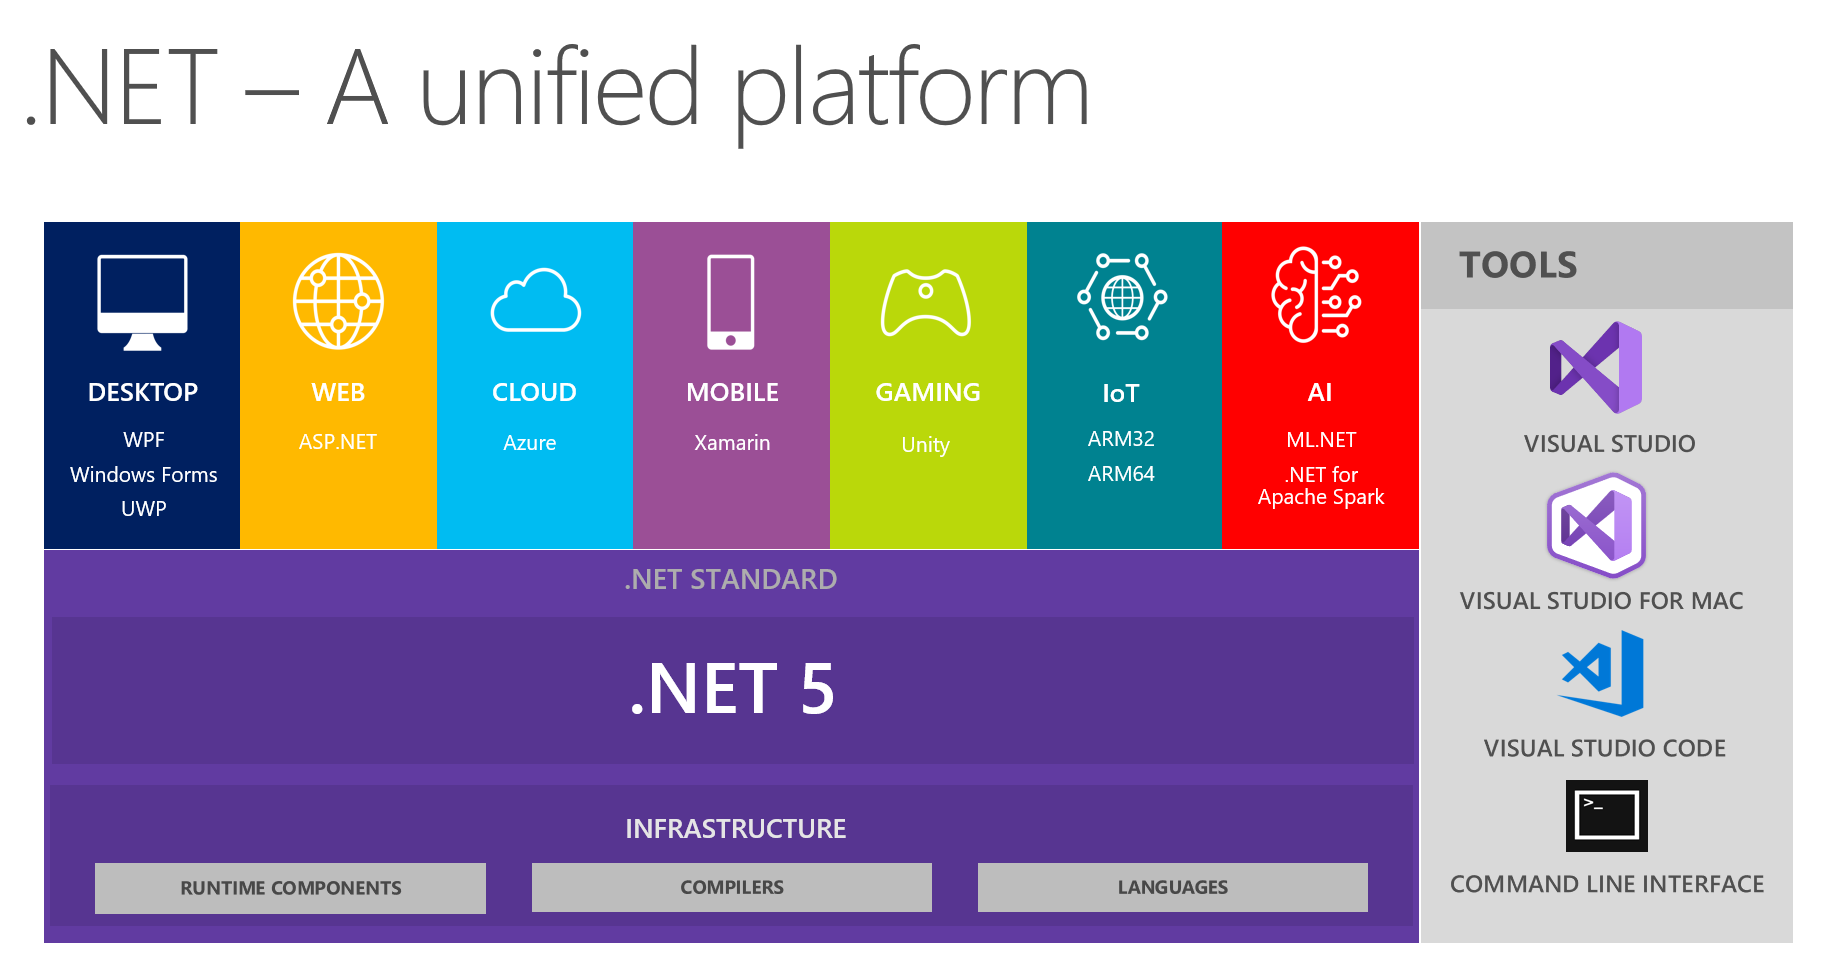 The .NET 5 eco system